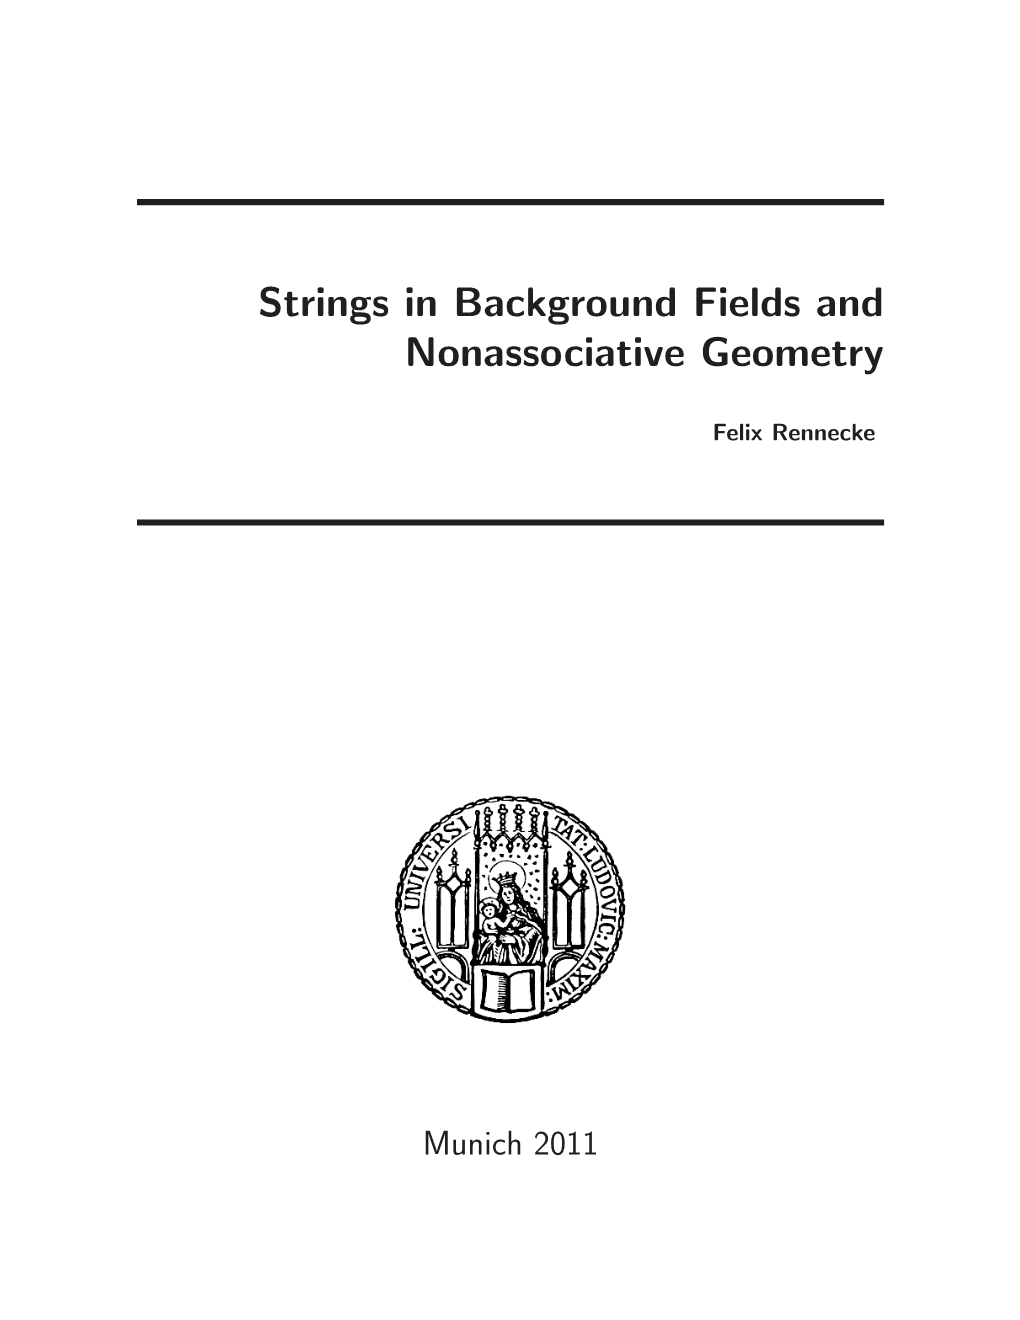 Strings in Background Fields and Nonassociative Geometry